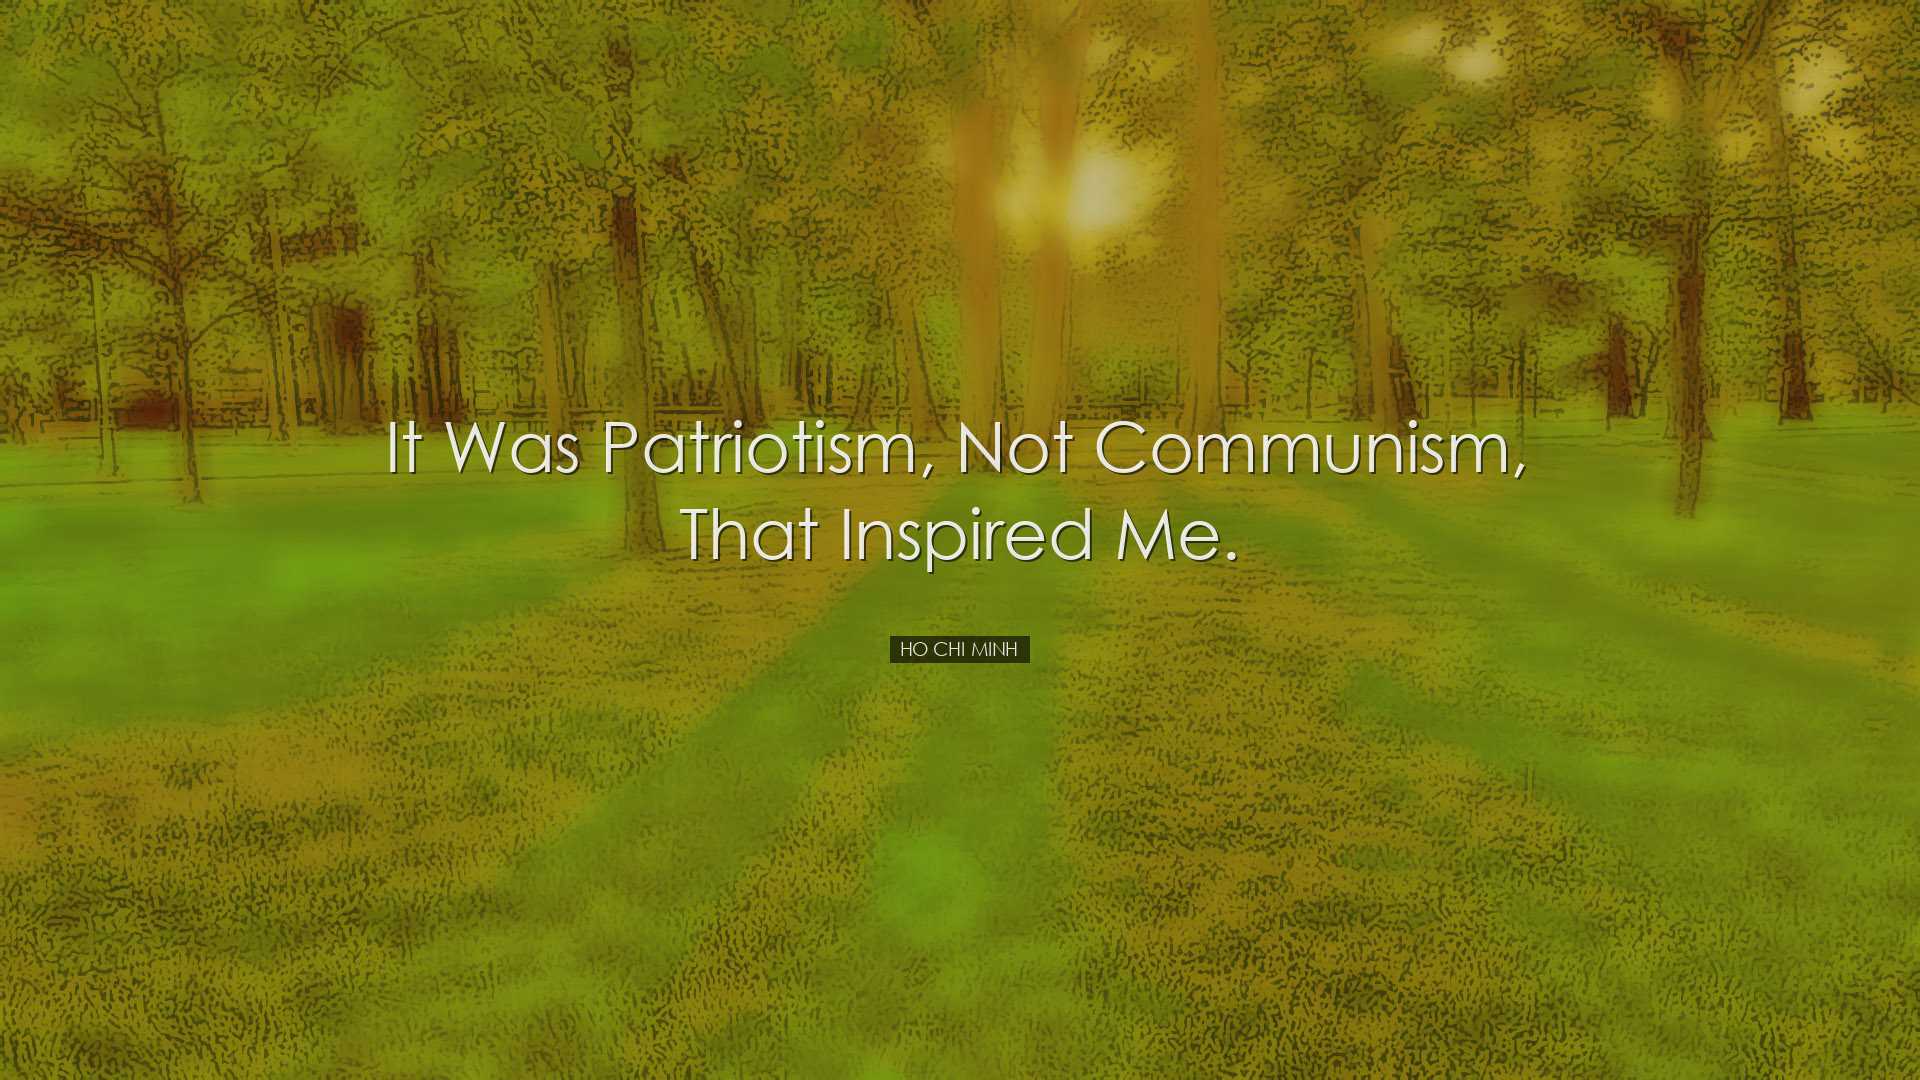 It was patriotism, not communism, that inspired me. - Ho Chi Minh